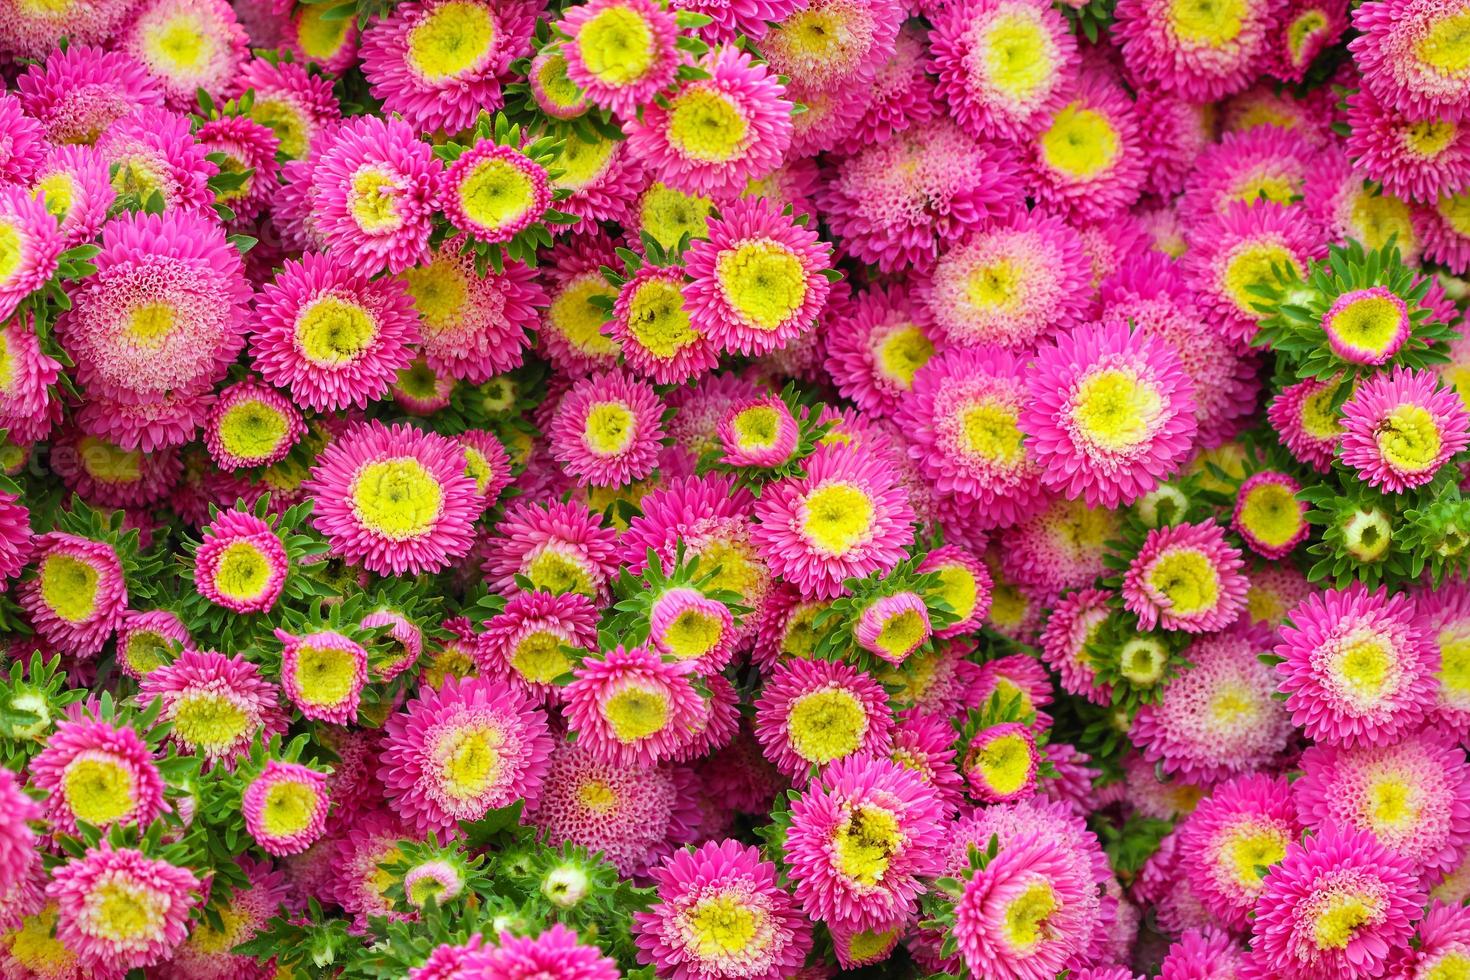 aster flowers background photo